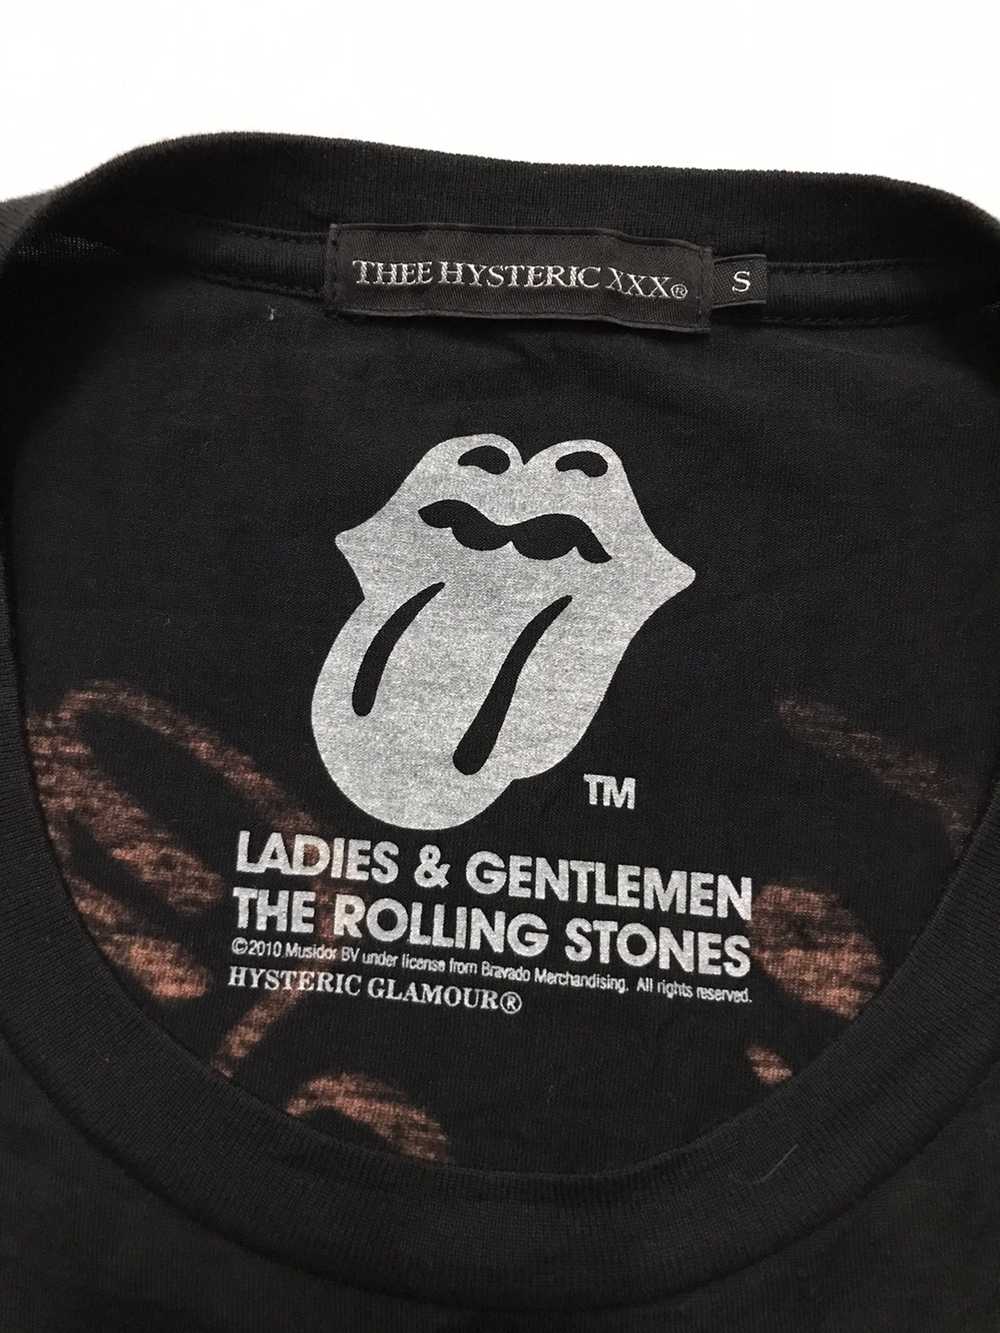 The Rolling Stones x Hysteric Glamour 2010 Tee - image 5